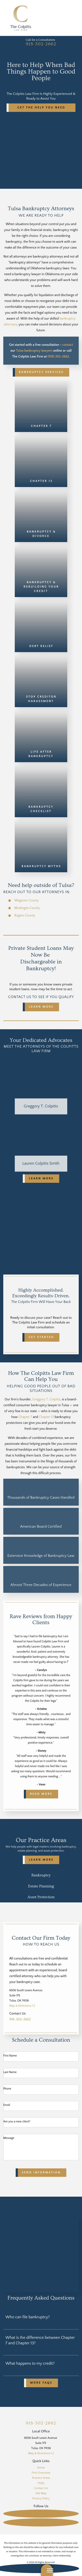 Colpitts Law Firm - Tulsa OK Lawyers